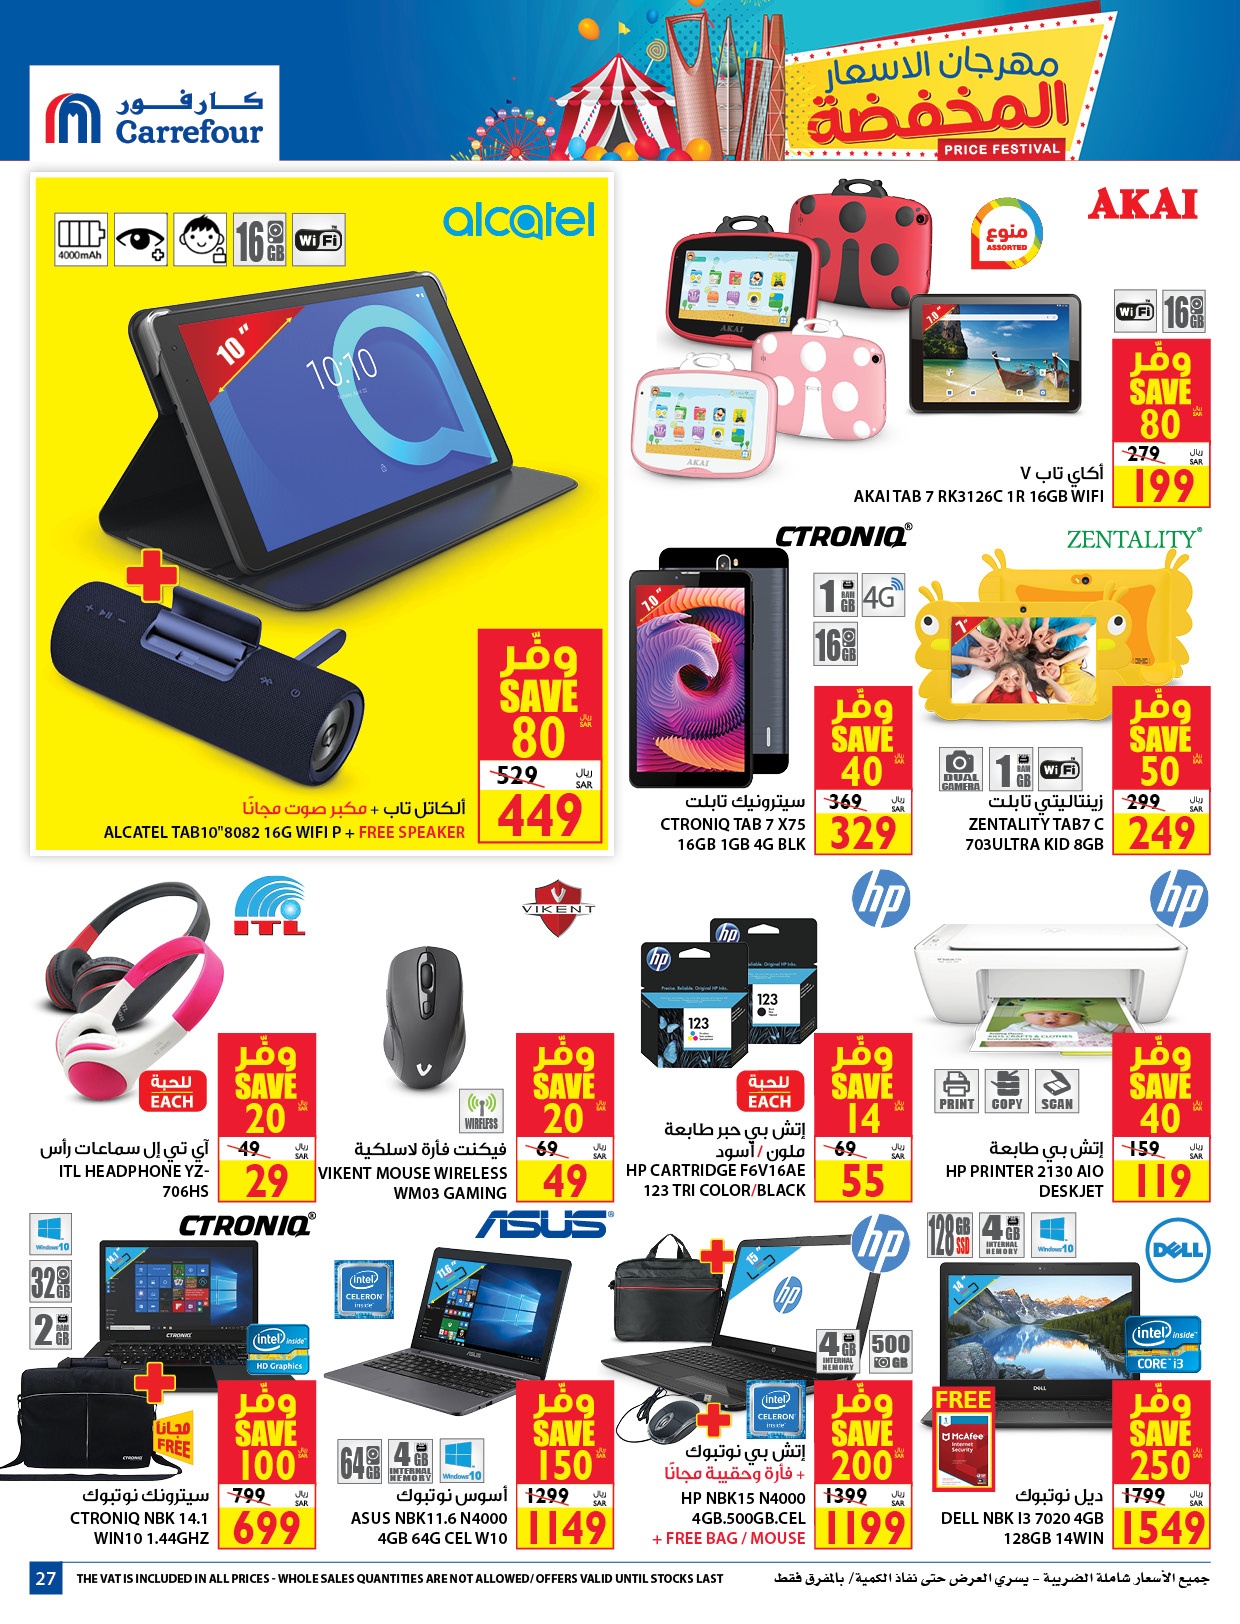 Carrefour Festival Offers from 12/8 till 25/8 | Carrefour KSA 29